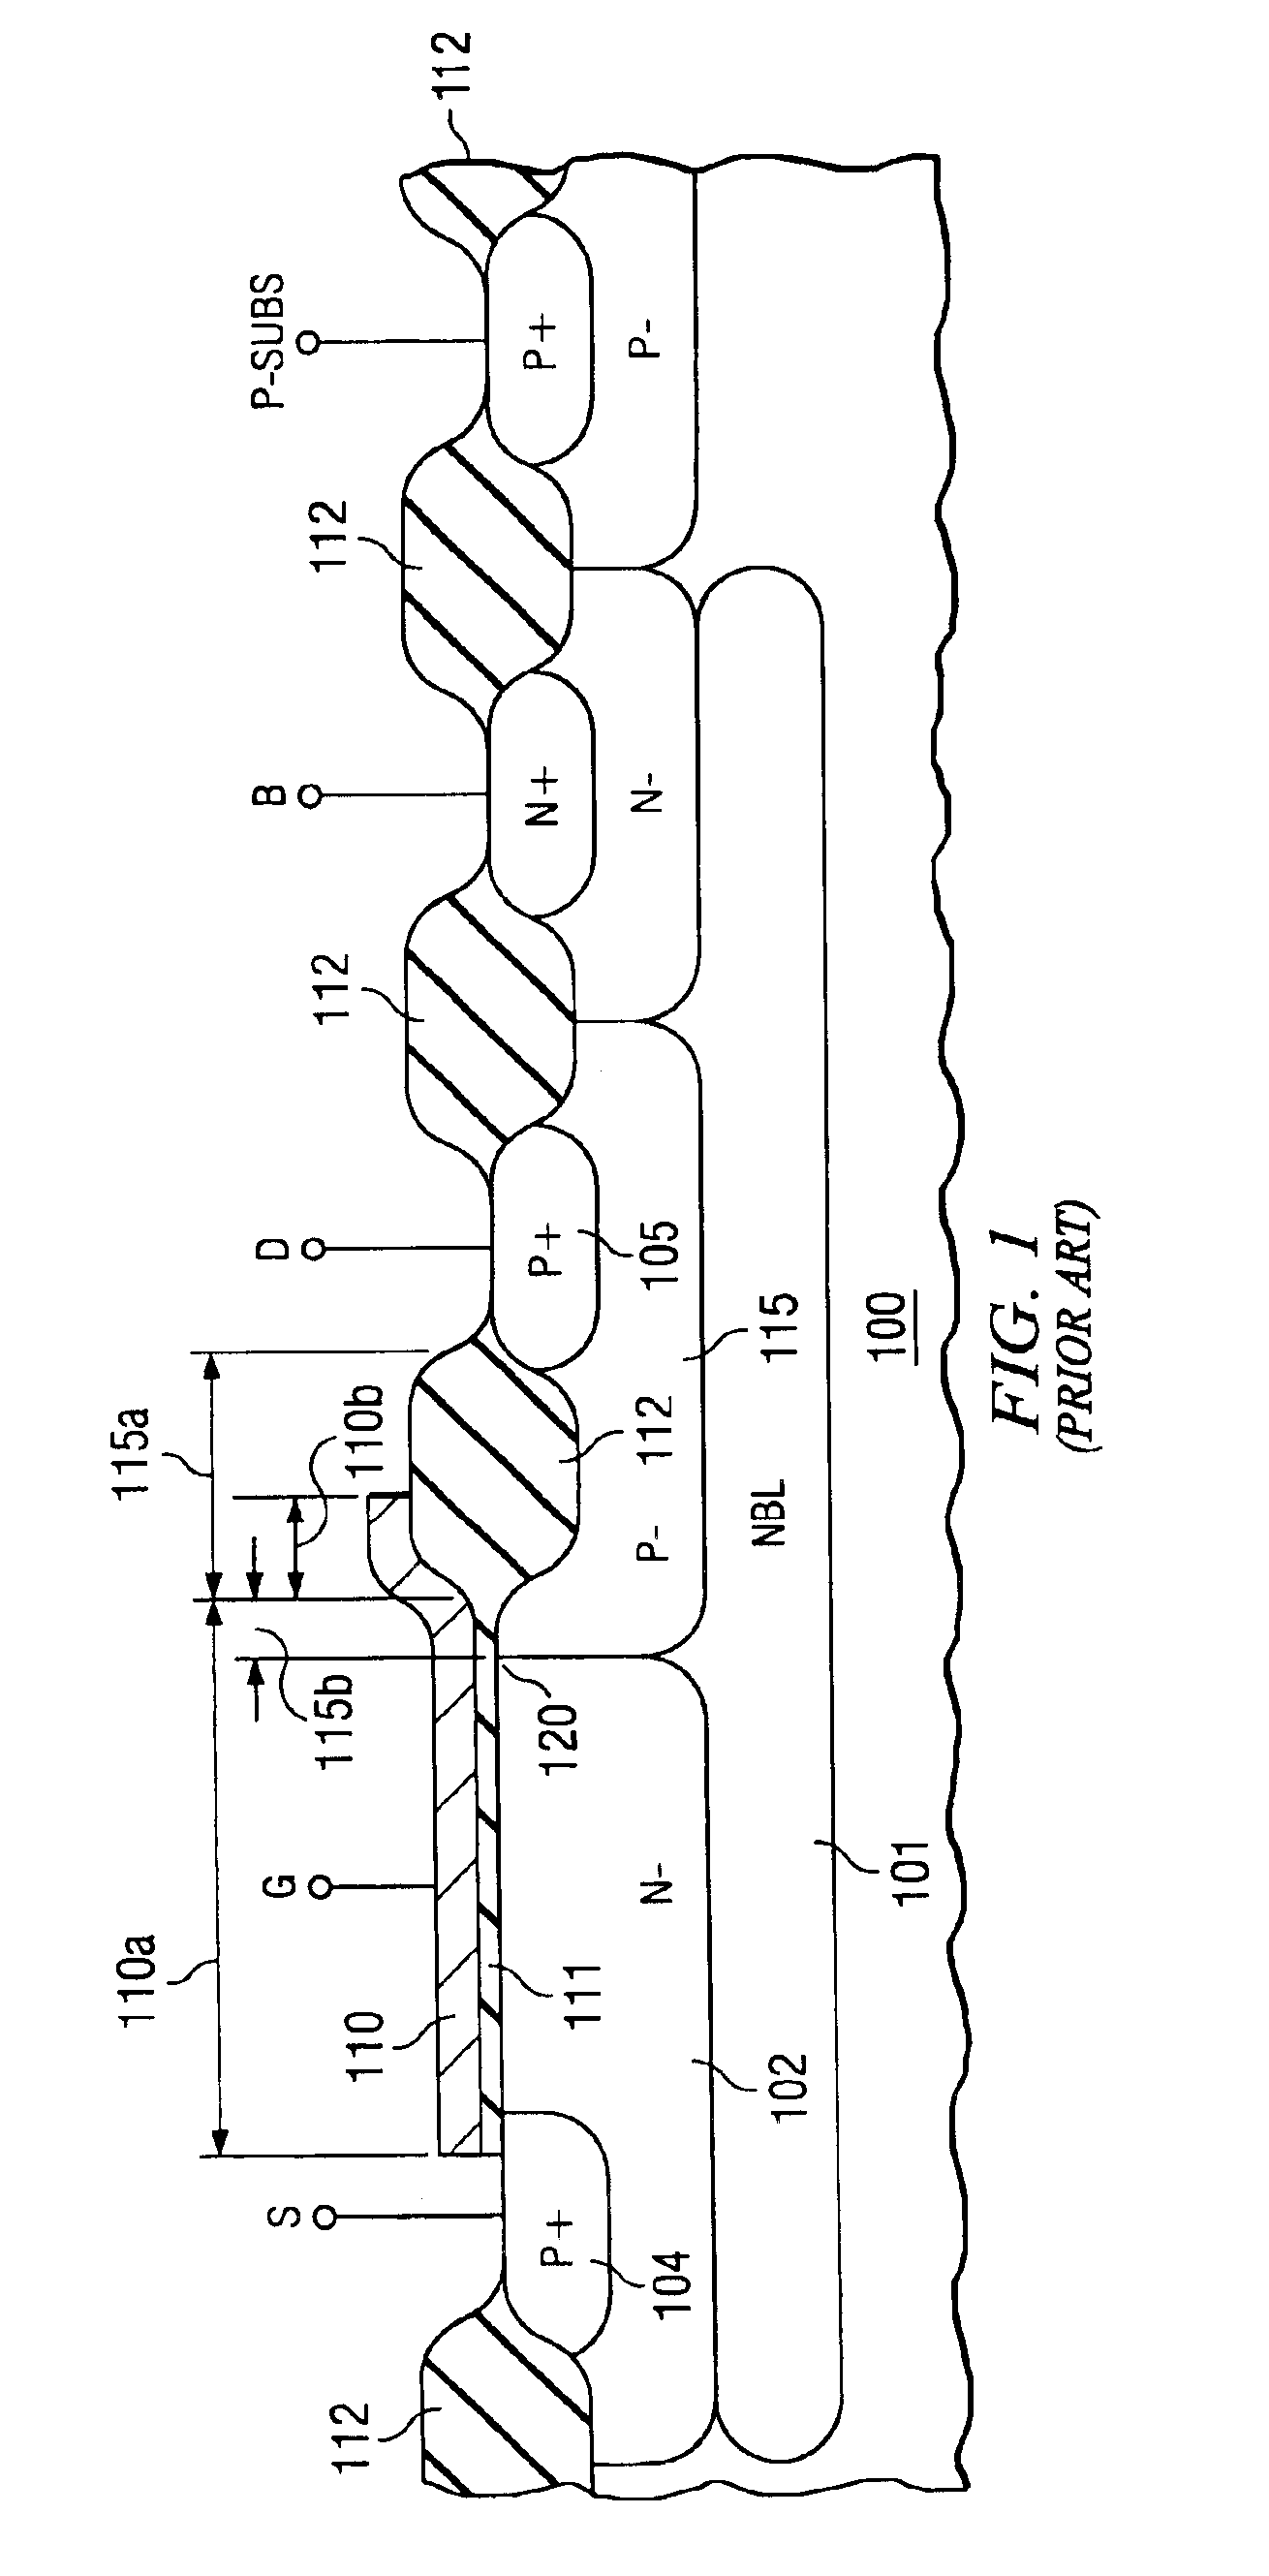 MOS transistors having higher drain current without reduced breakdown voltage